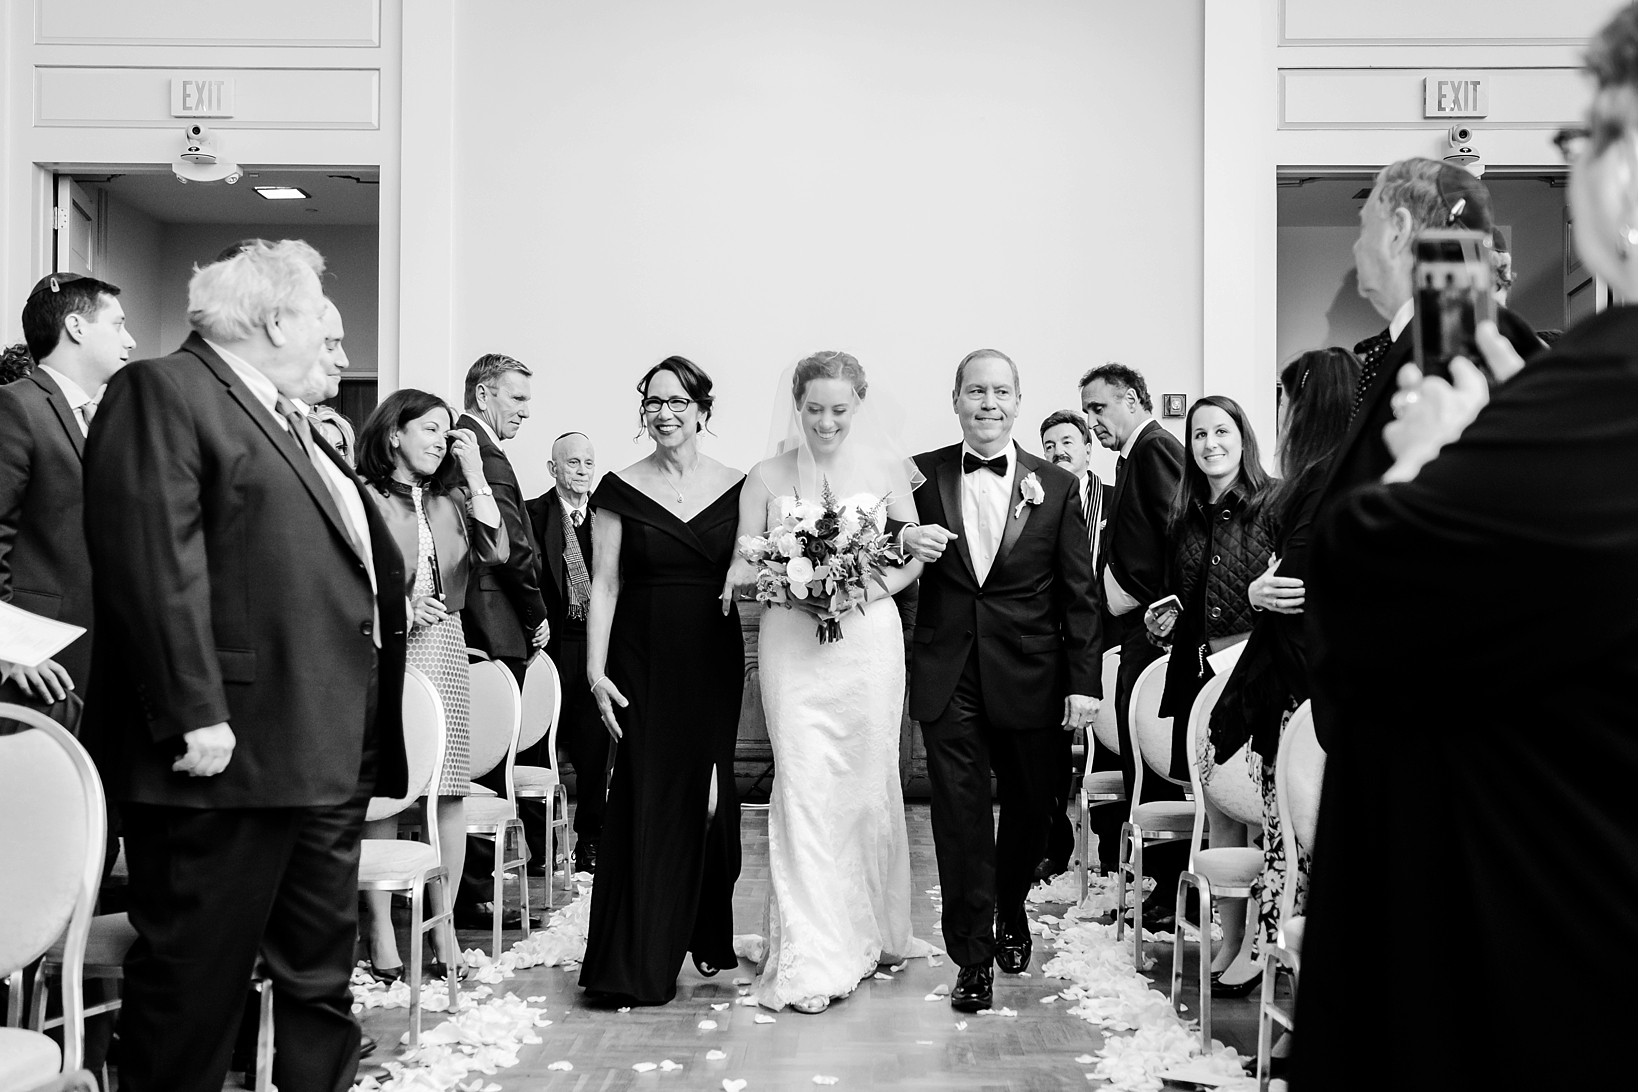 The Bride being escorted down the aisle by her parents in stunning black and white